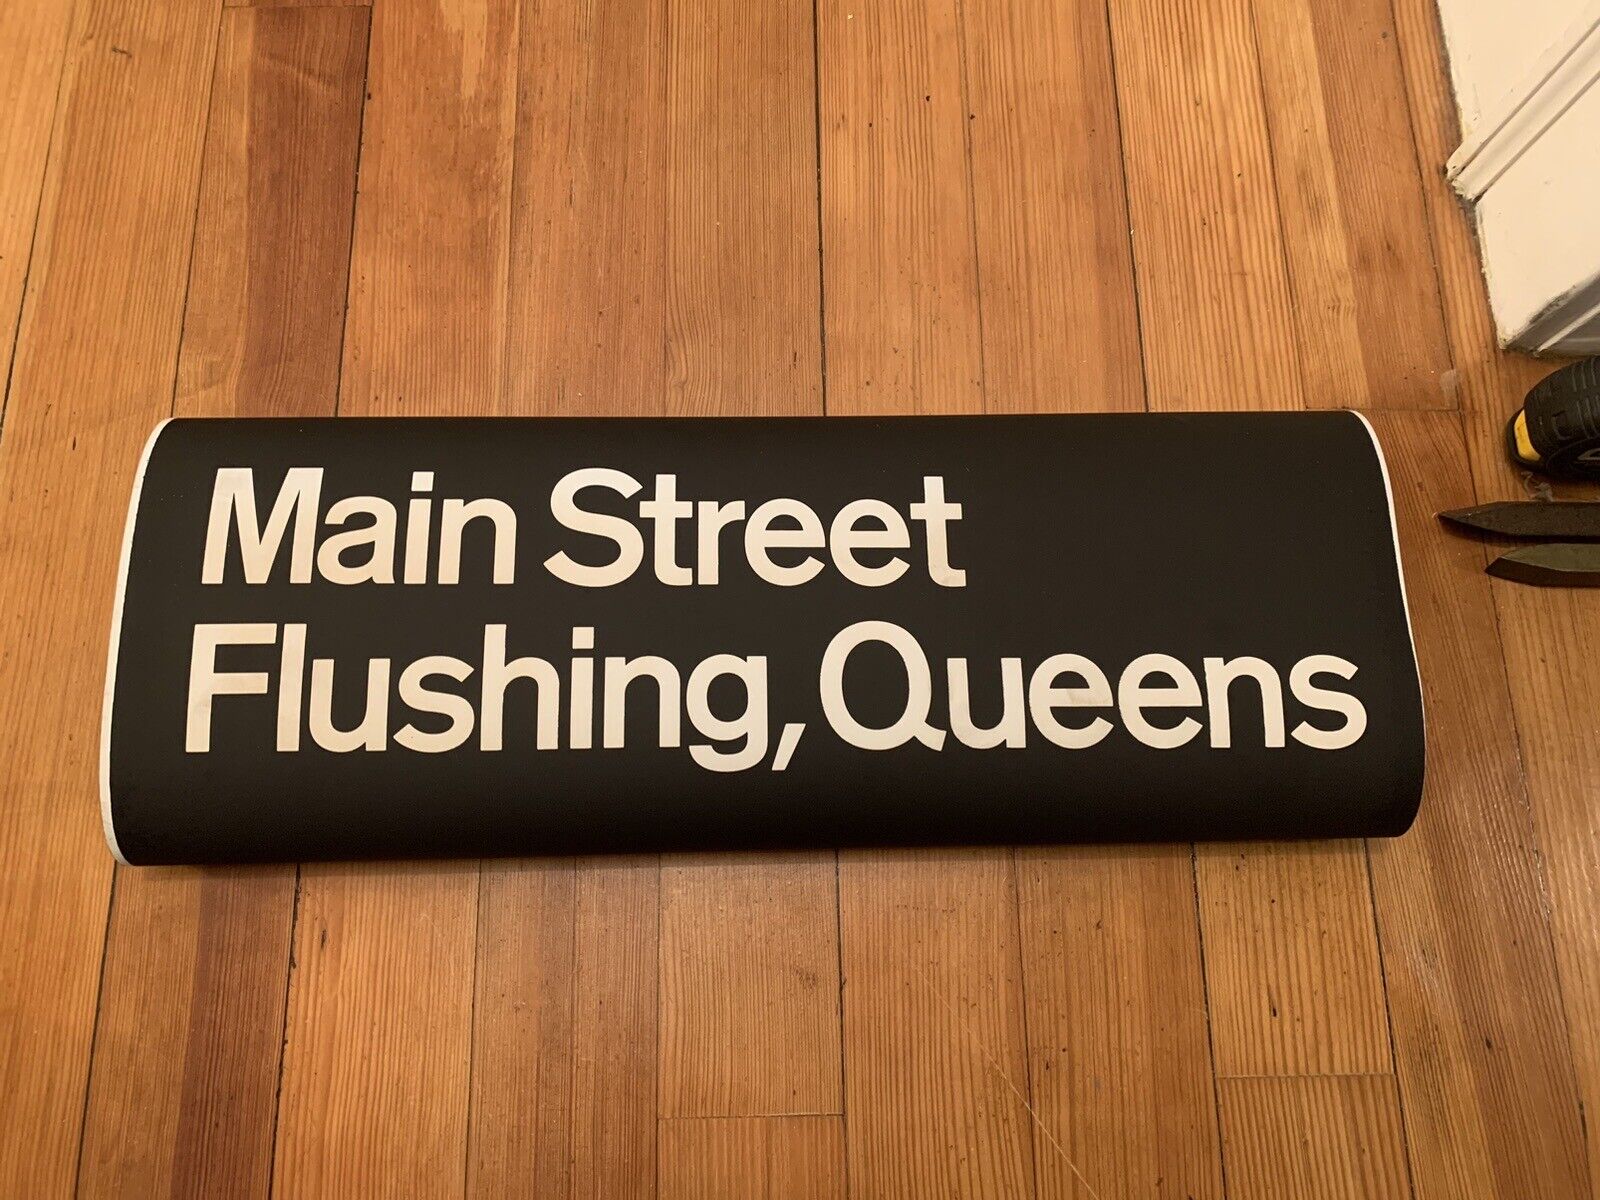 R21 NY NYC SUBWAY VINTAGE ROLL SIGN MAIN STREET FLUSHING QUEENS ROOSEVELT AVENUE